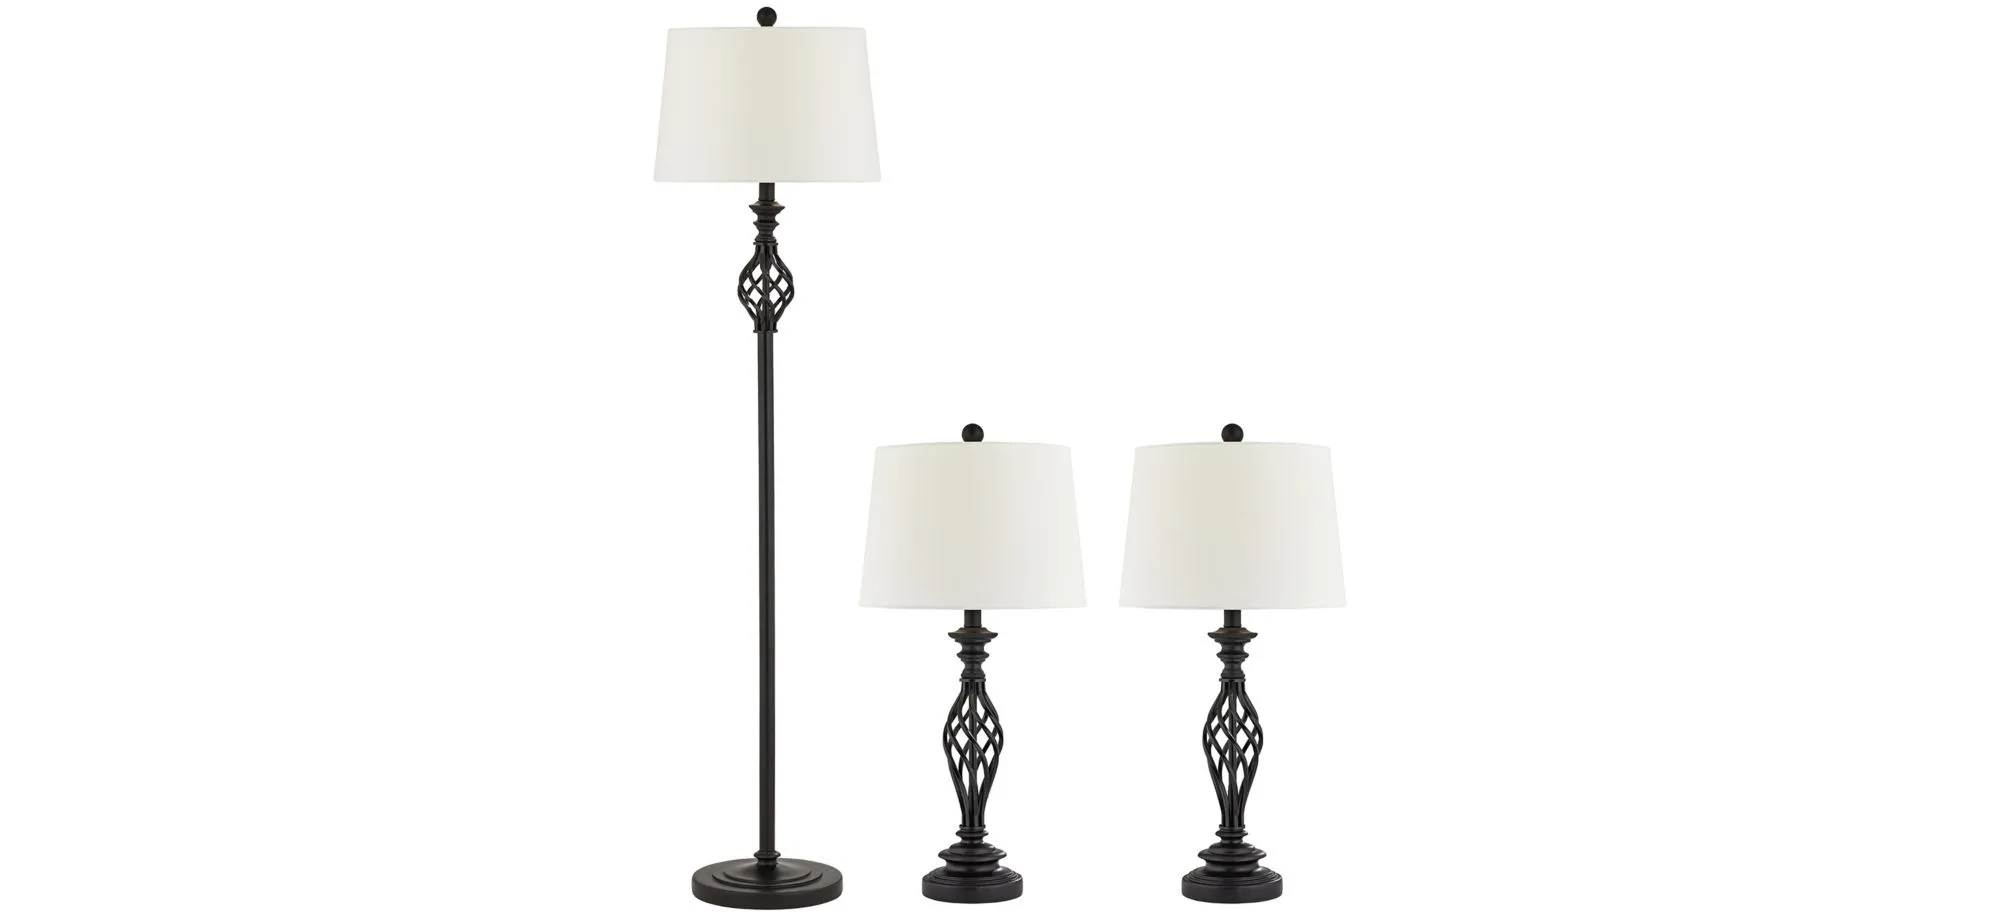 Alma Lamp Set of Three in Black by Pacific Coast